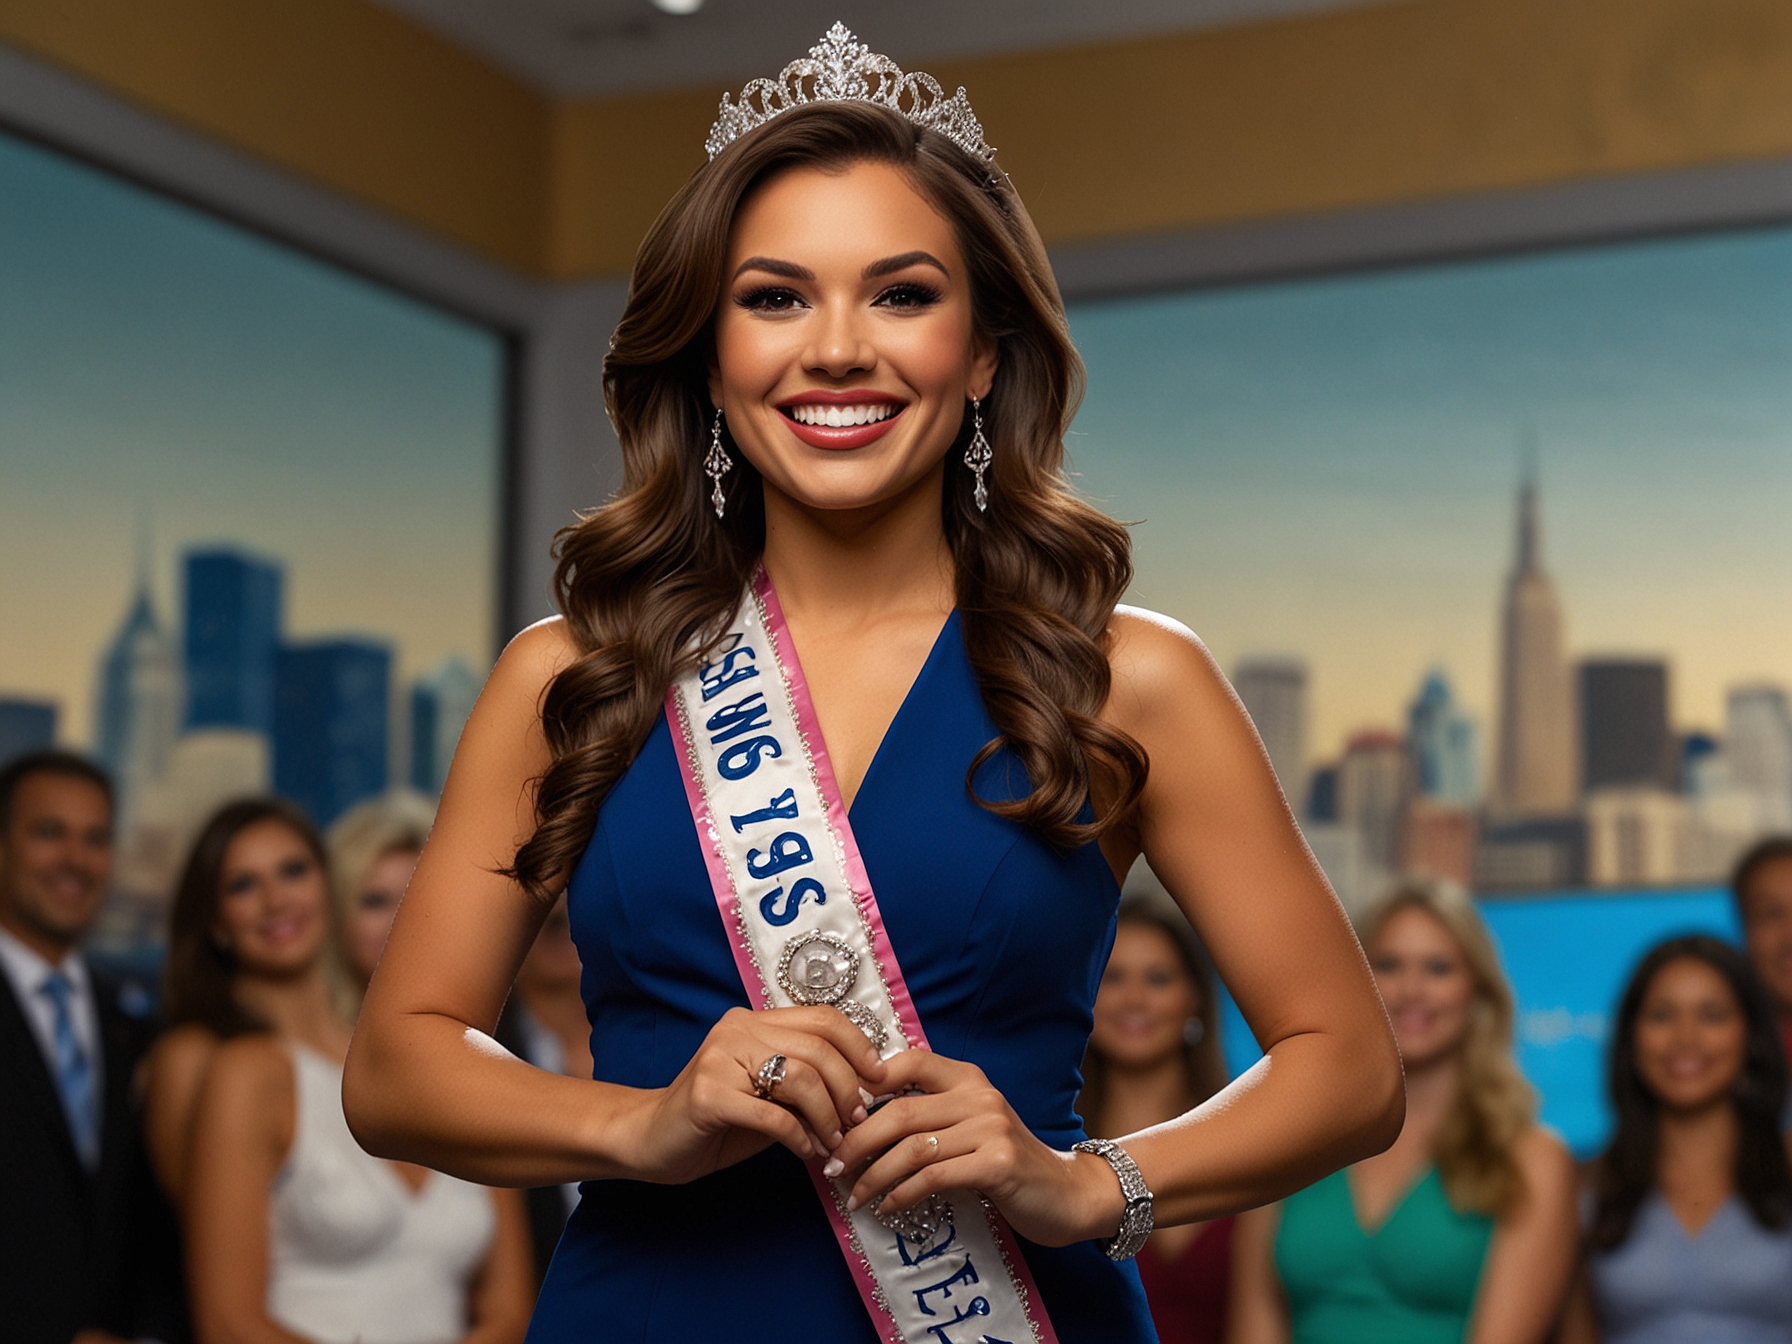 Marissa Teijo, dressed elegantly, smiling confidently at a press event, symbolizing her groundbreaking role as the oldest contestant in the Miss Texas USA pageant at 71.